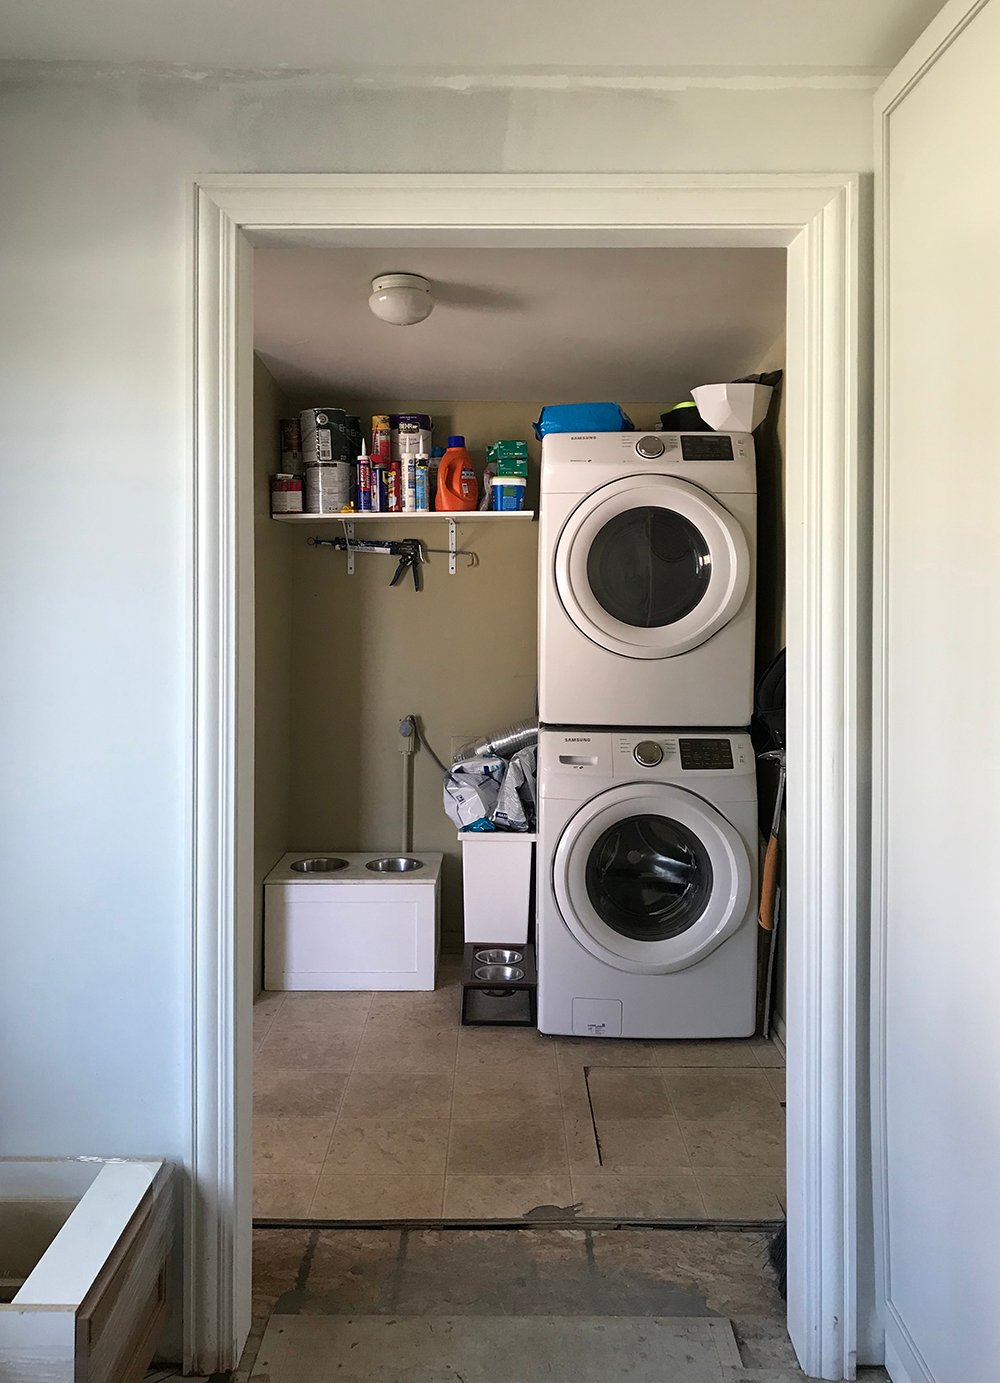 Laundry Room : One Room Challenge - Week 1 - roomfortuesday.com